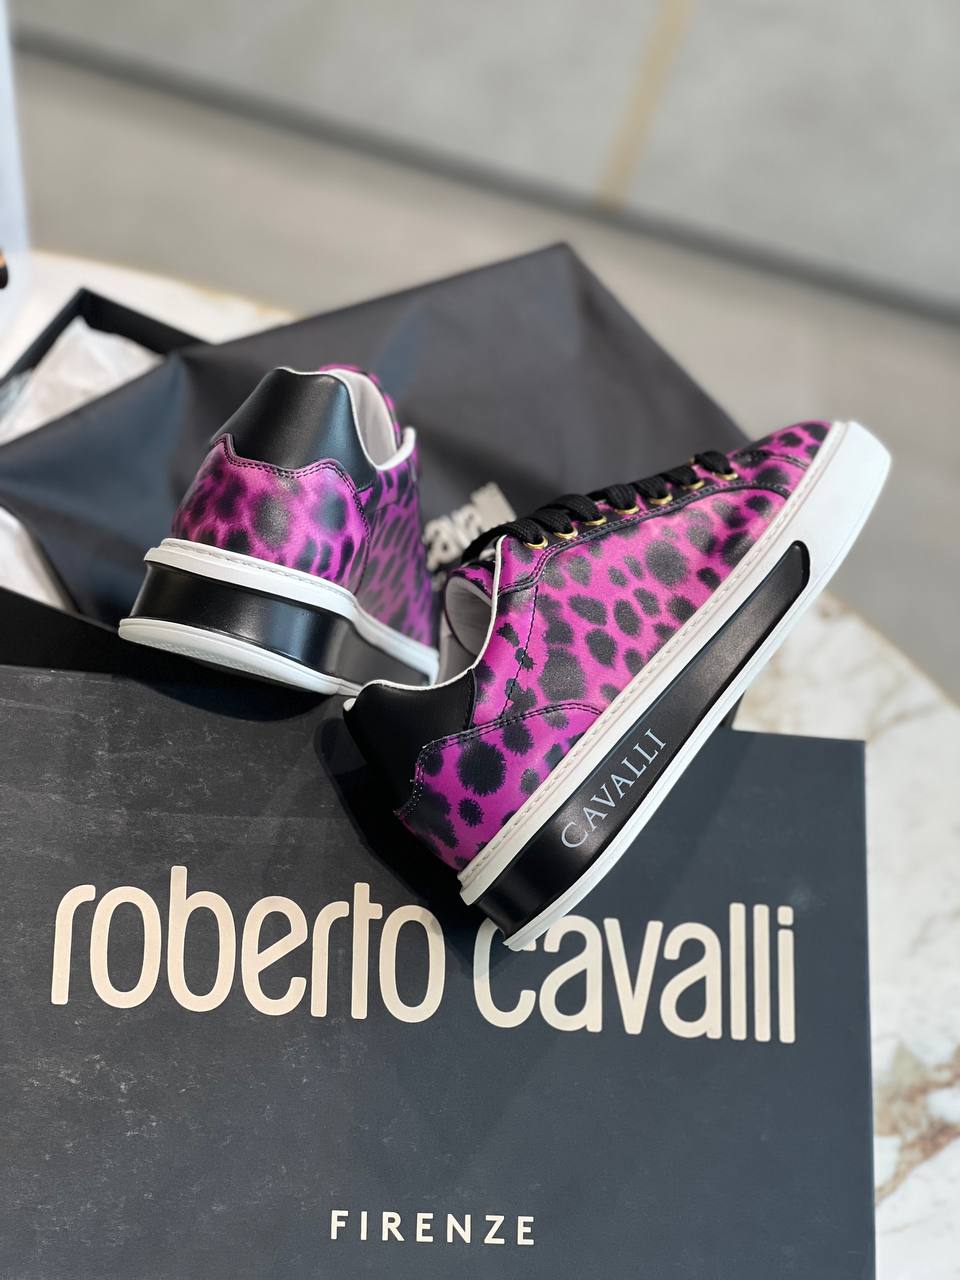 Roberto Cavalli Outlets 4431